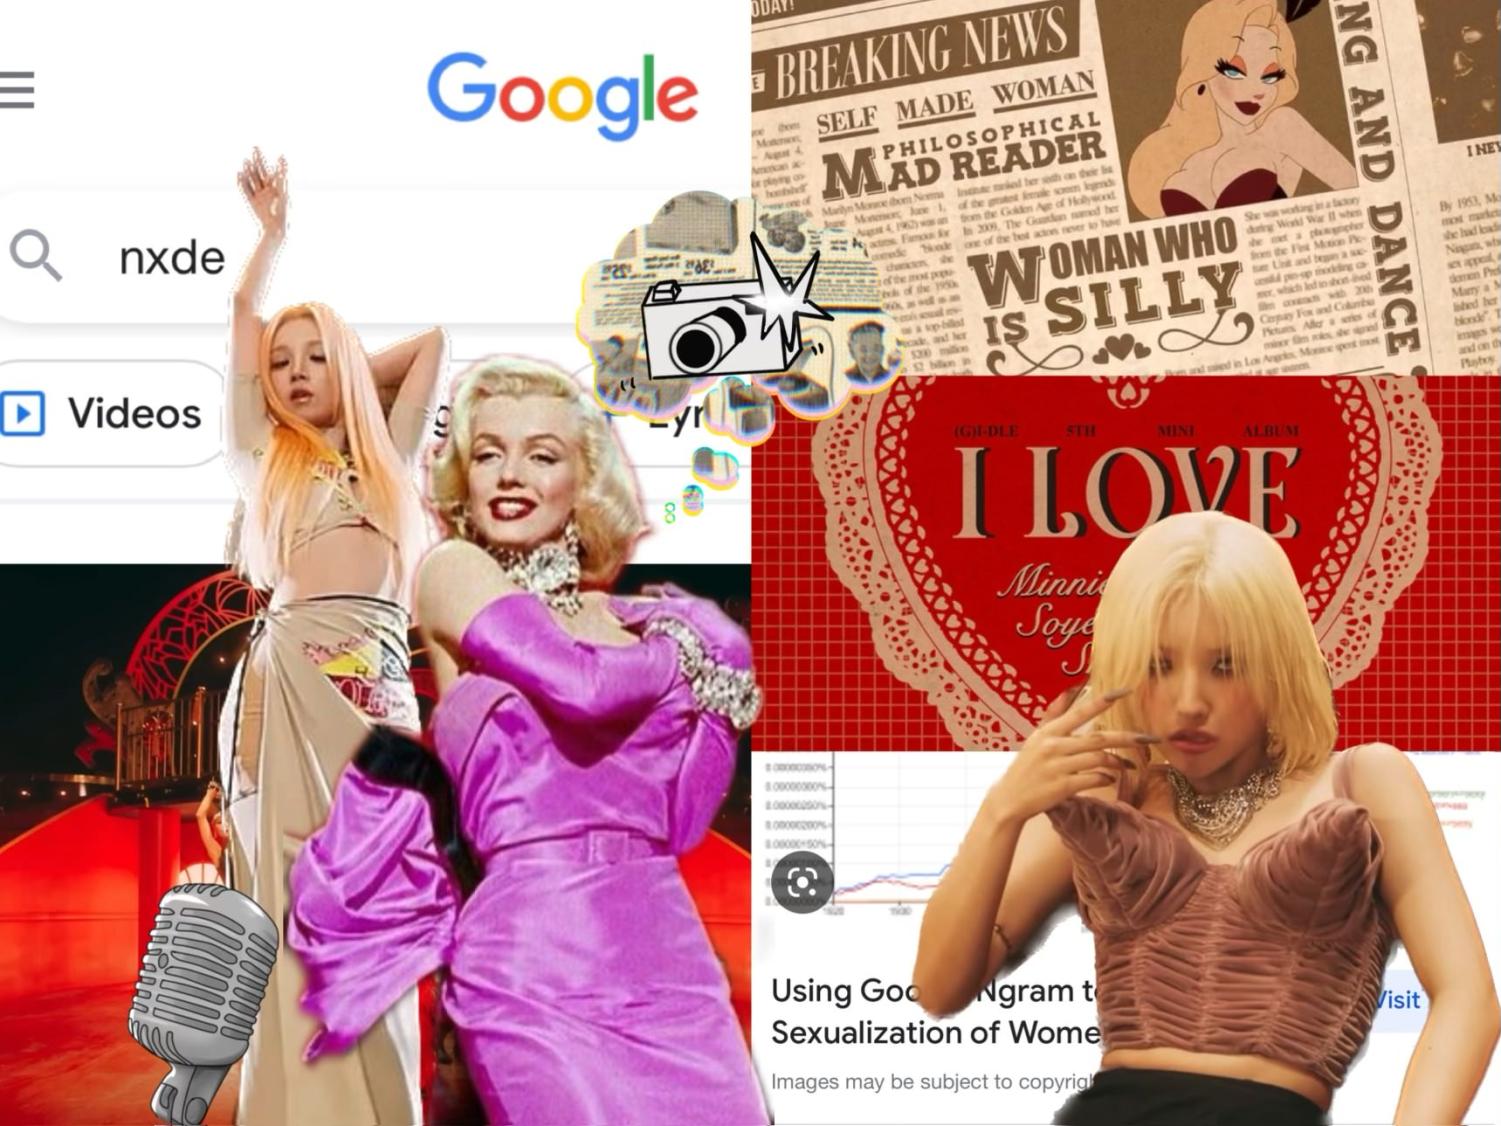 The release of “Nxde,” the title track in k-pop girl group (G)-idle’s newest album, sheds light on the sexualization of women in media and how search engines perpetuate unjust stereotypes. Taking inspiration from the timeless icon Marilyn Monroe and her experiences, “Nxde” raises conversations about society’s paralleling criticisms and disrespectful portrayals of females. This collage pieces together key elements from  “Nxde”‘s music video, an iconic outfit of Monroe from “Gentlemen Prefer Blondes (1953)”, and screenshots of search engines and graphs that further the podcast’s main discussion. 